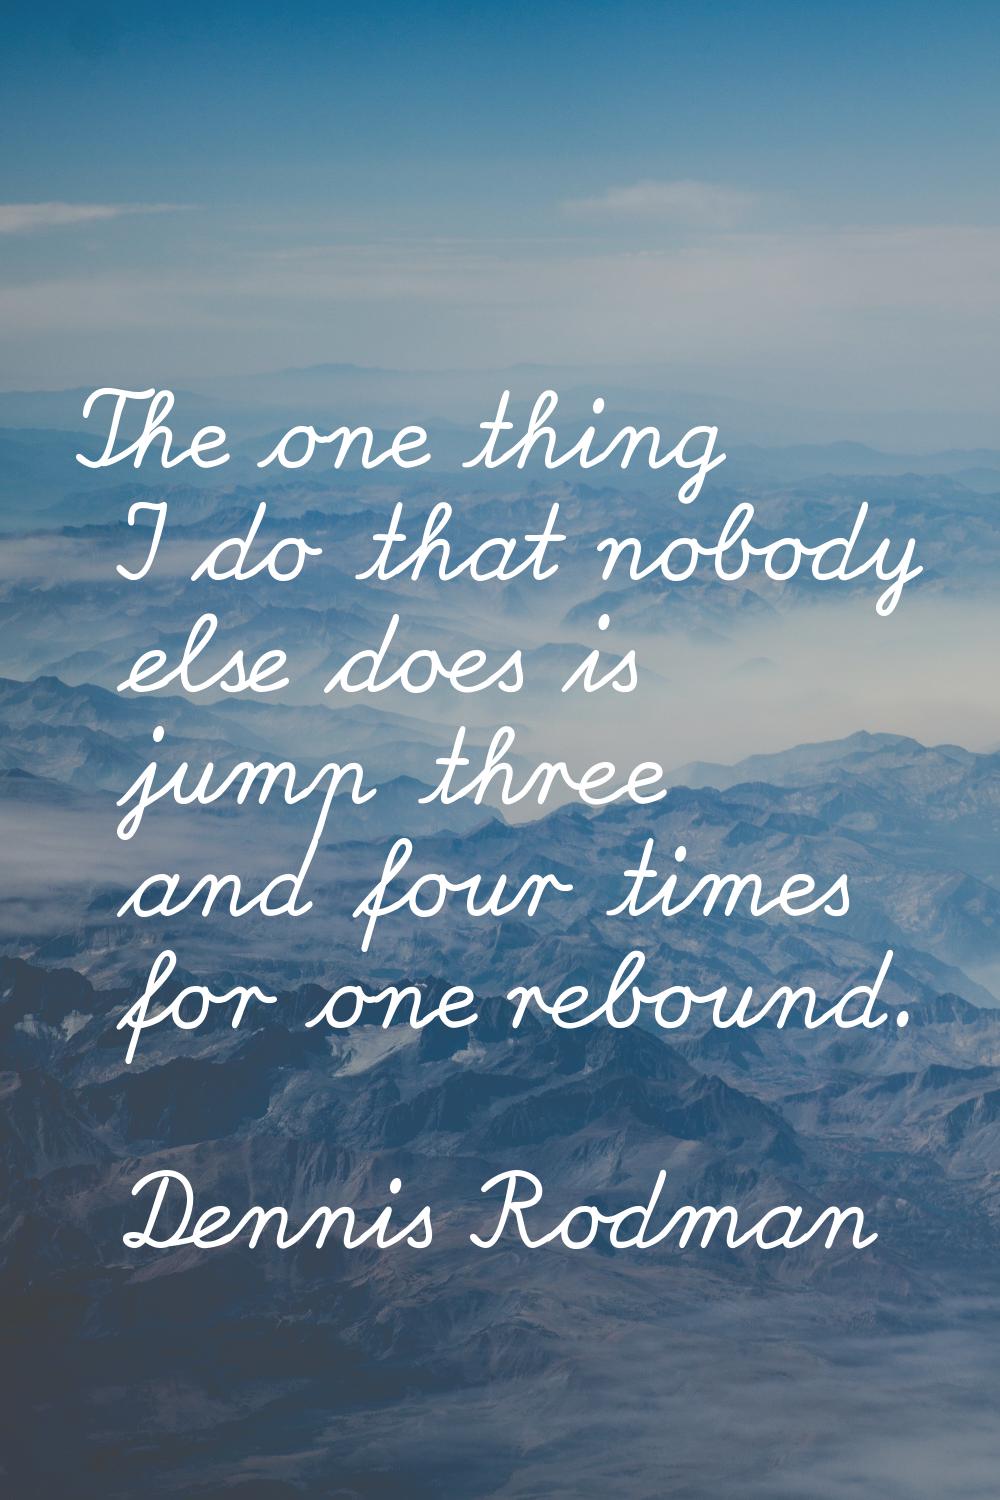 The one thing I do that nobody else does is jump three and four times for one rebound.